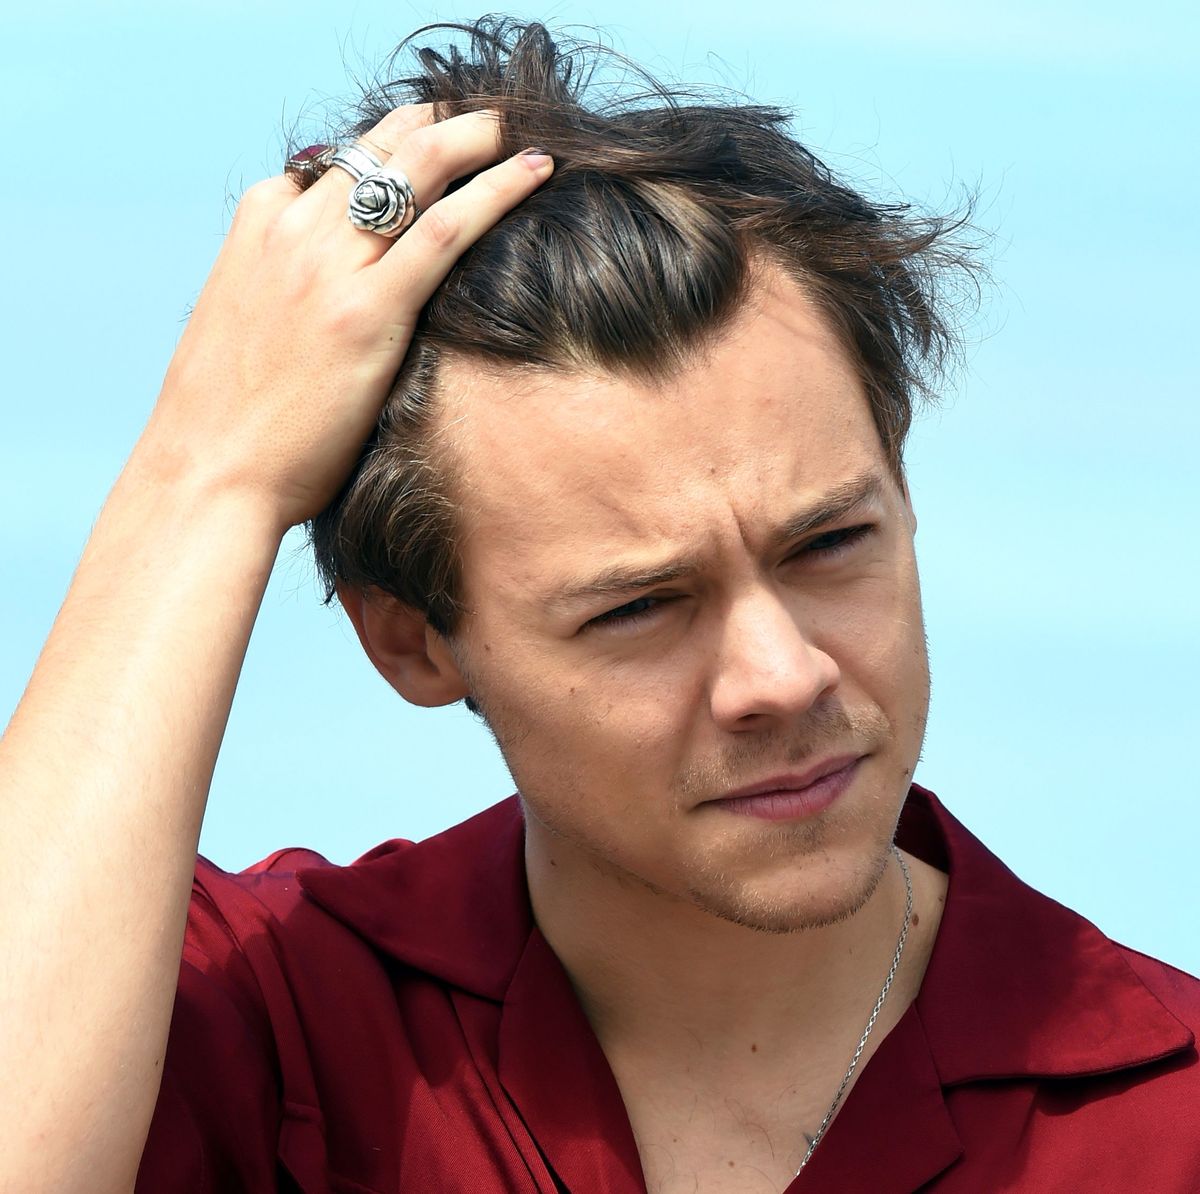 Harry Styles Cut His Hair Short - See Harry's New Hairstyle